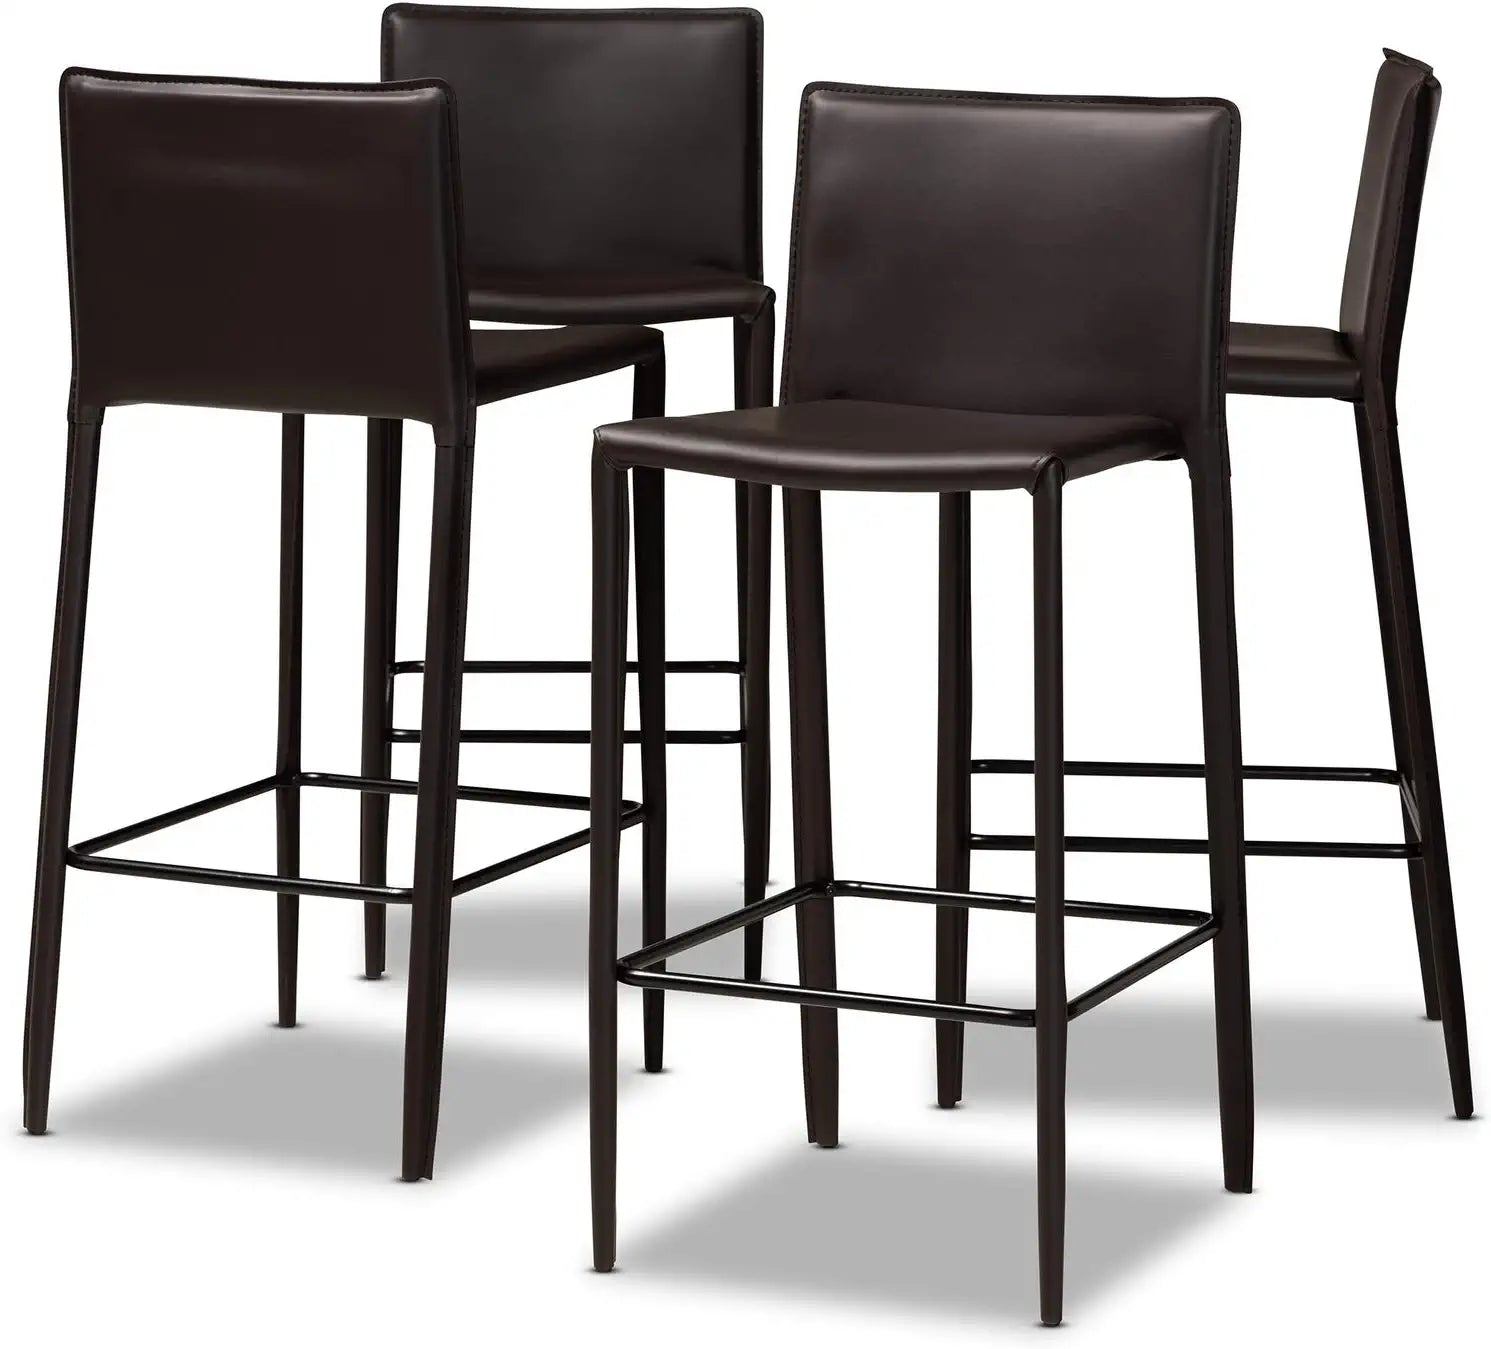 Baxton Studio Malcom Modern and Contemporary Black Faux Leather Upholstered 4-Piece Bar Stool Set